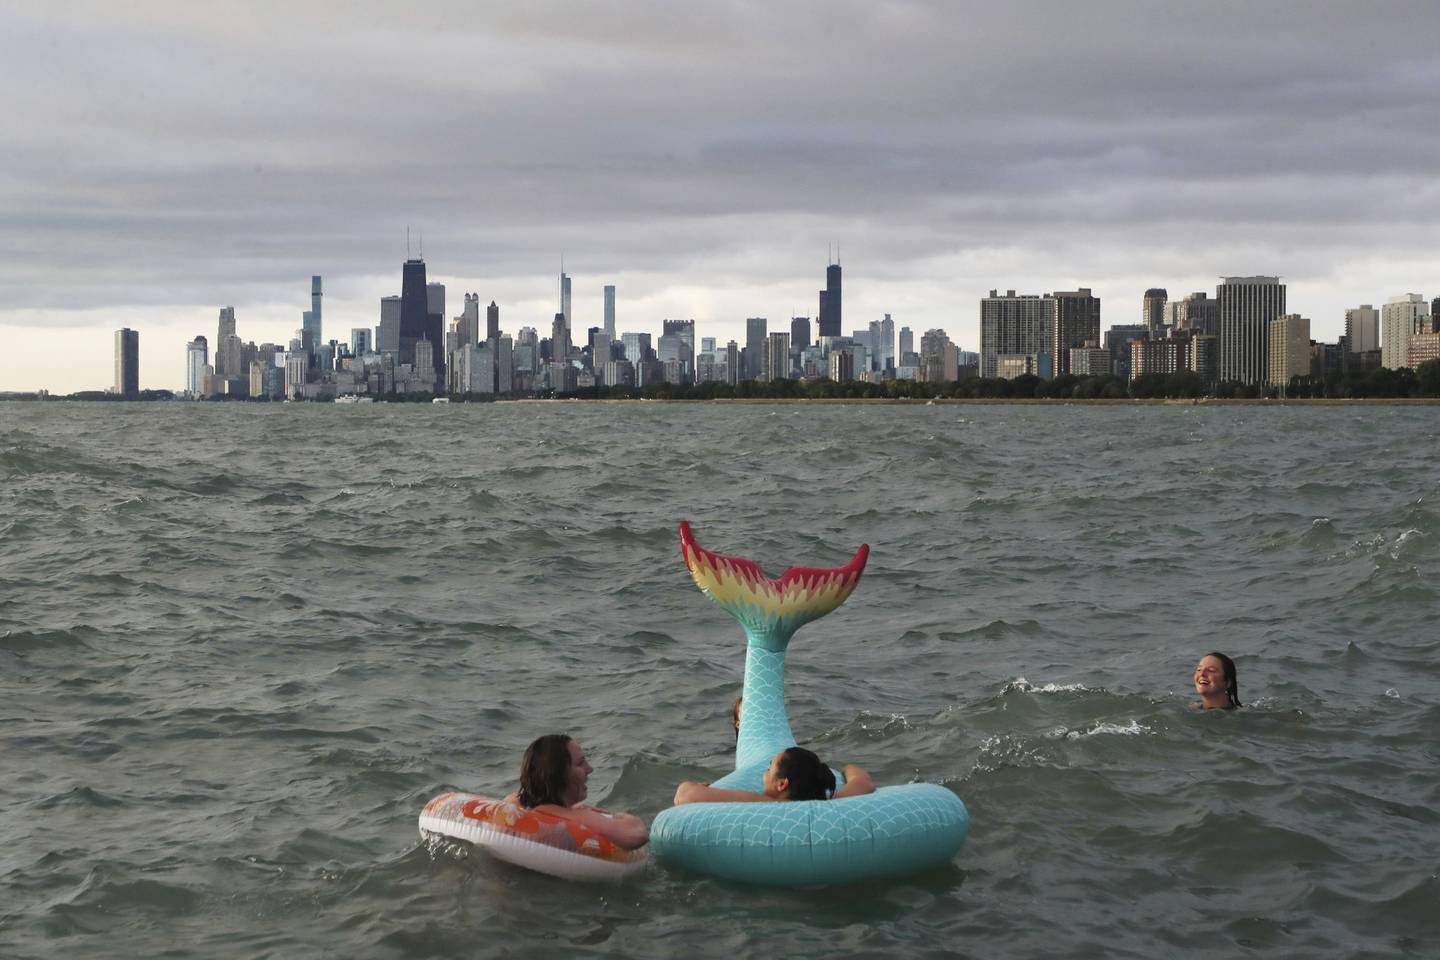 Lauren Anderson, left, and Gloria Janek, center, take in the high waves and skyline while floating in Lake Michigan as part of the Friday Morning Swim Club at Montrose Harbor.